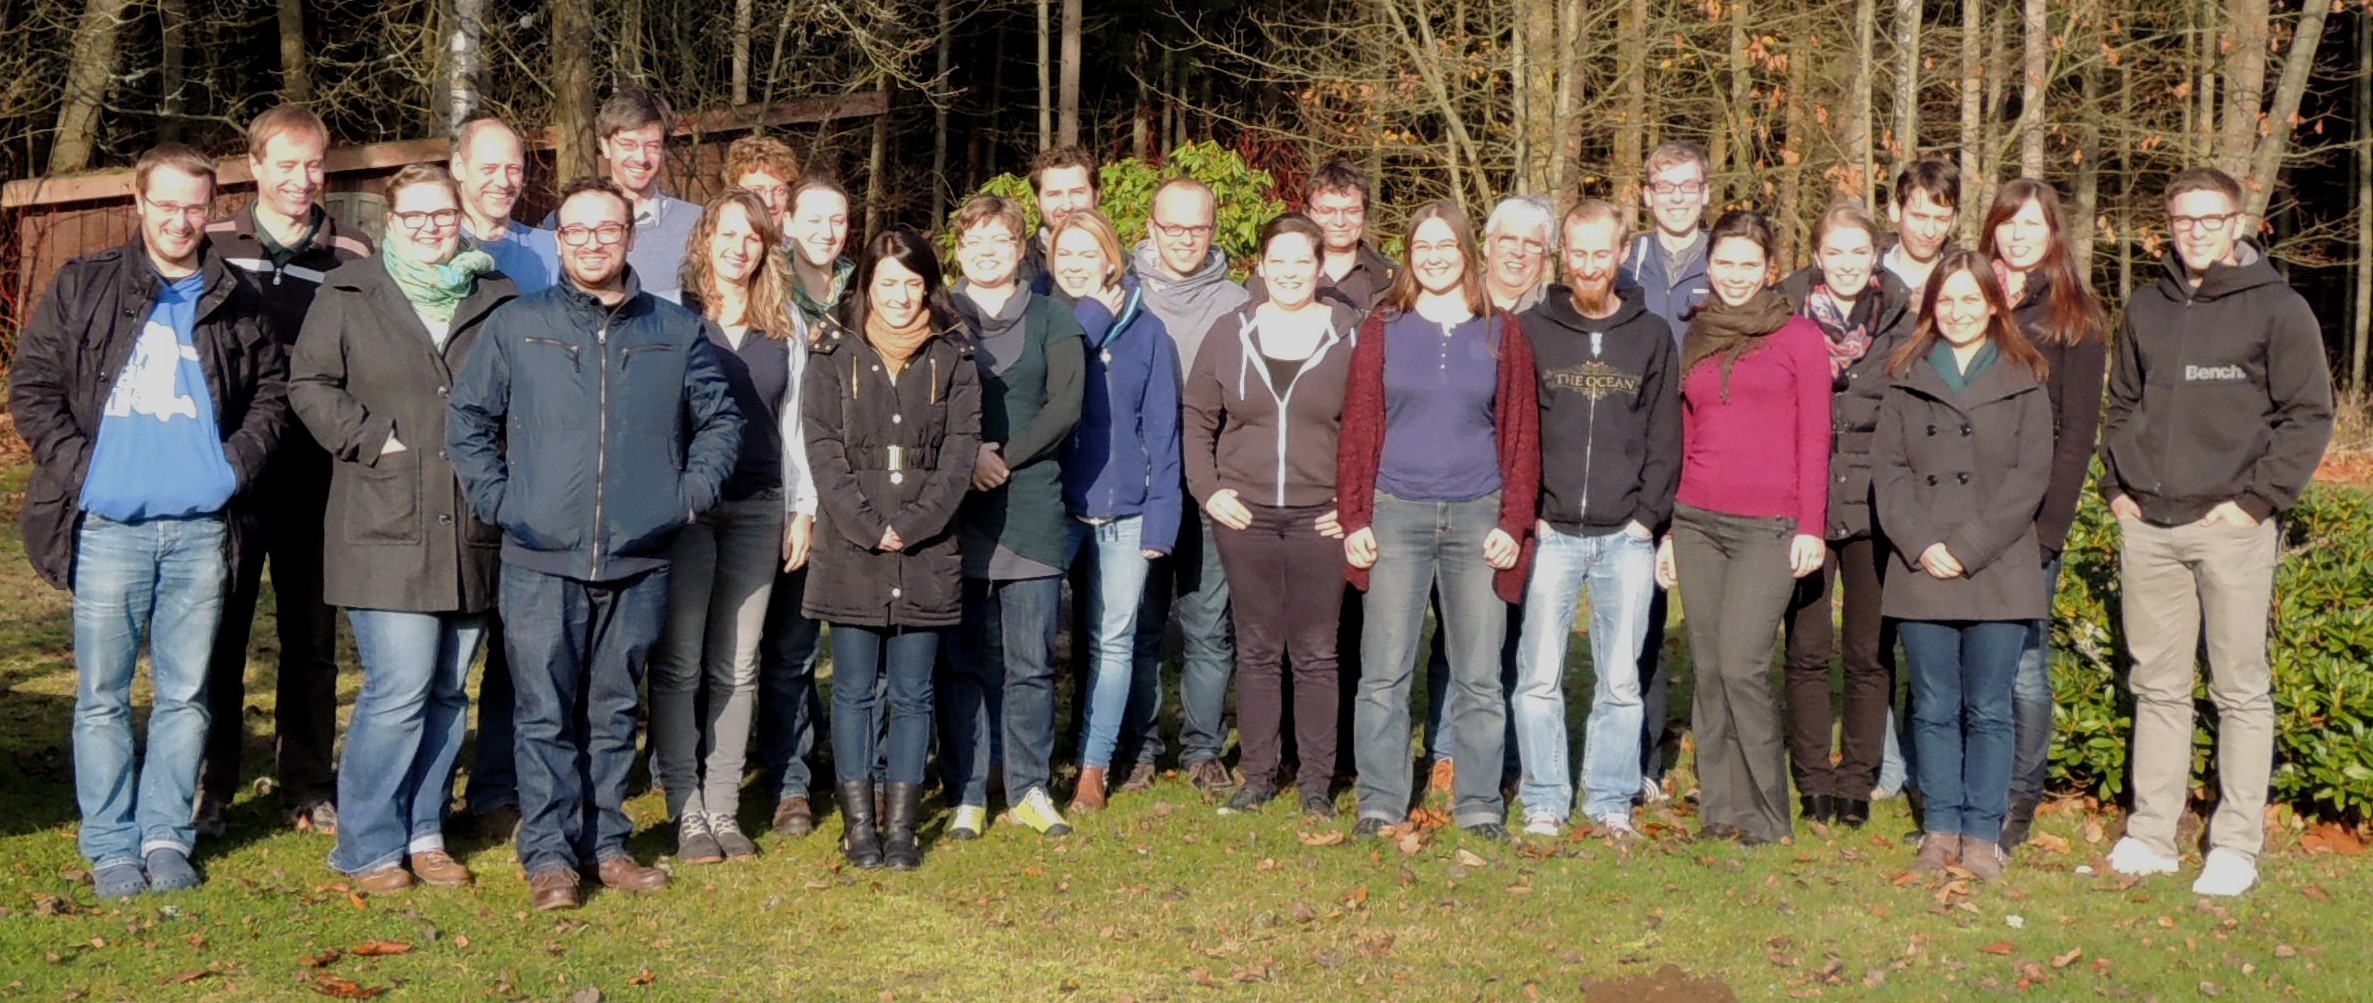 Group photo from the 6th BZMB PhD student symposium in Selb (November 21-22, 2014)